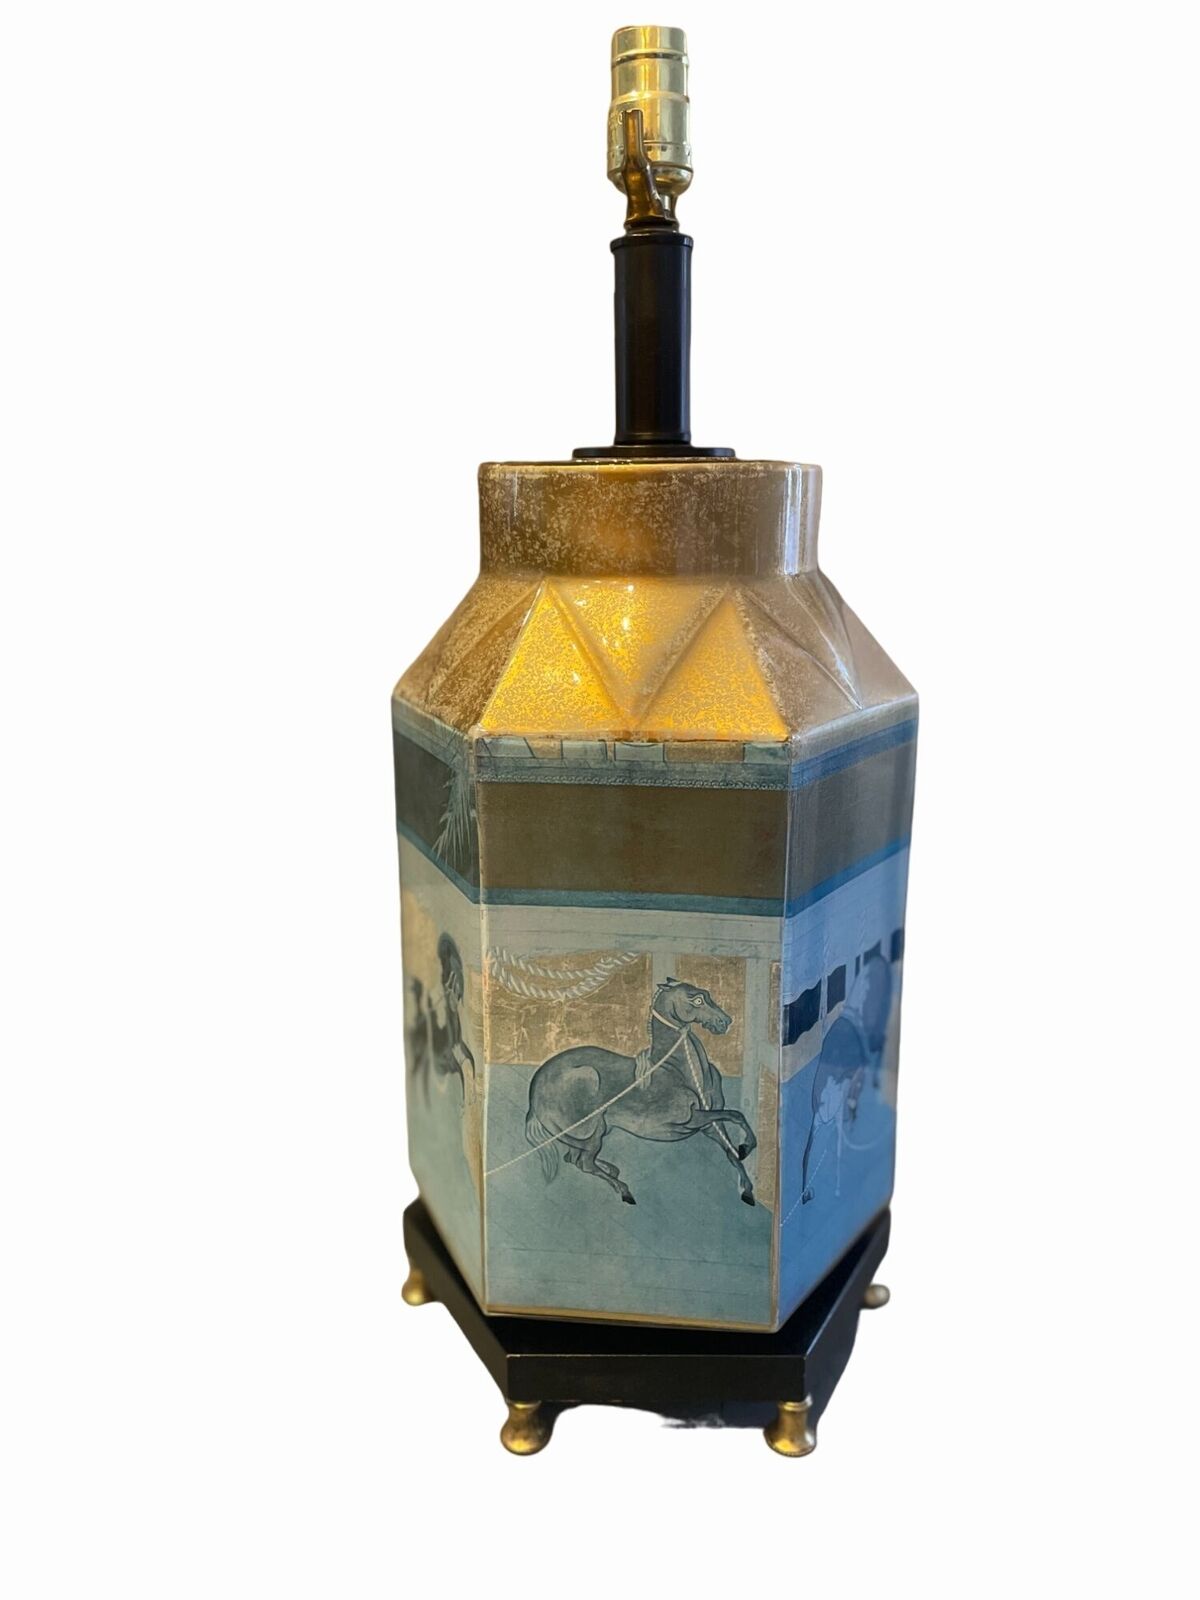 Vintage reverse painted hexagon lamp equestrian carousel horse blue and gold